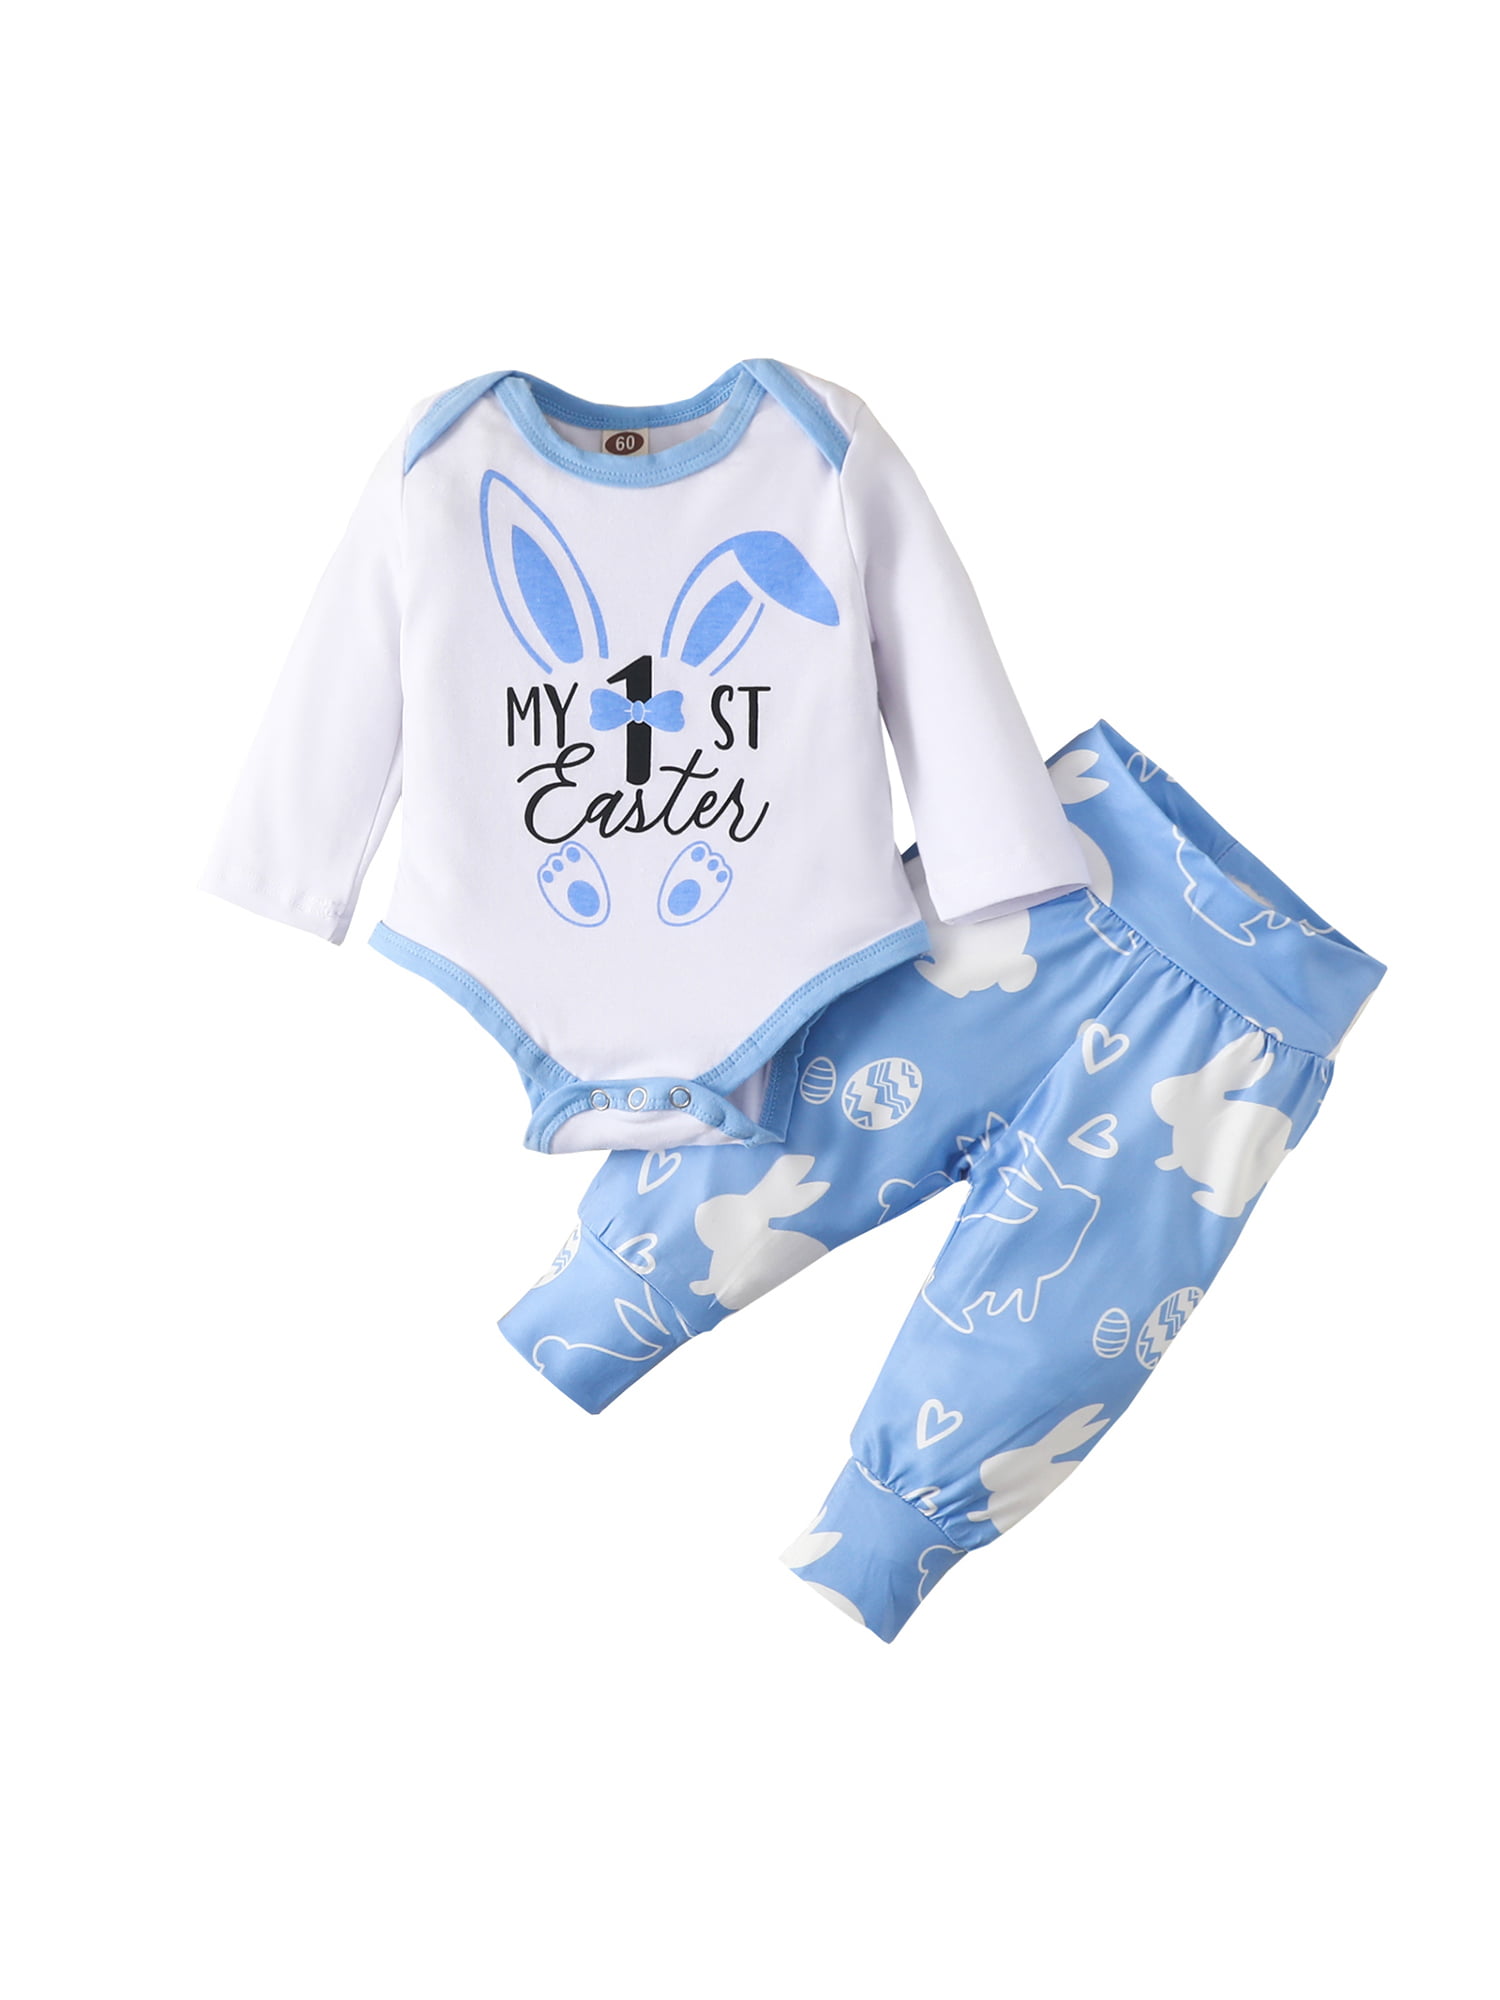 Baby Girl Easter Rabbit Outfits Clothes Set Newborn Rabbit Printing Long-Sleeved Top and Pants Headband 3Piece Suit